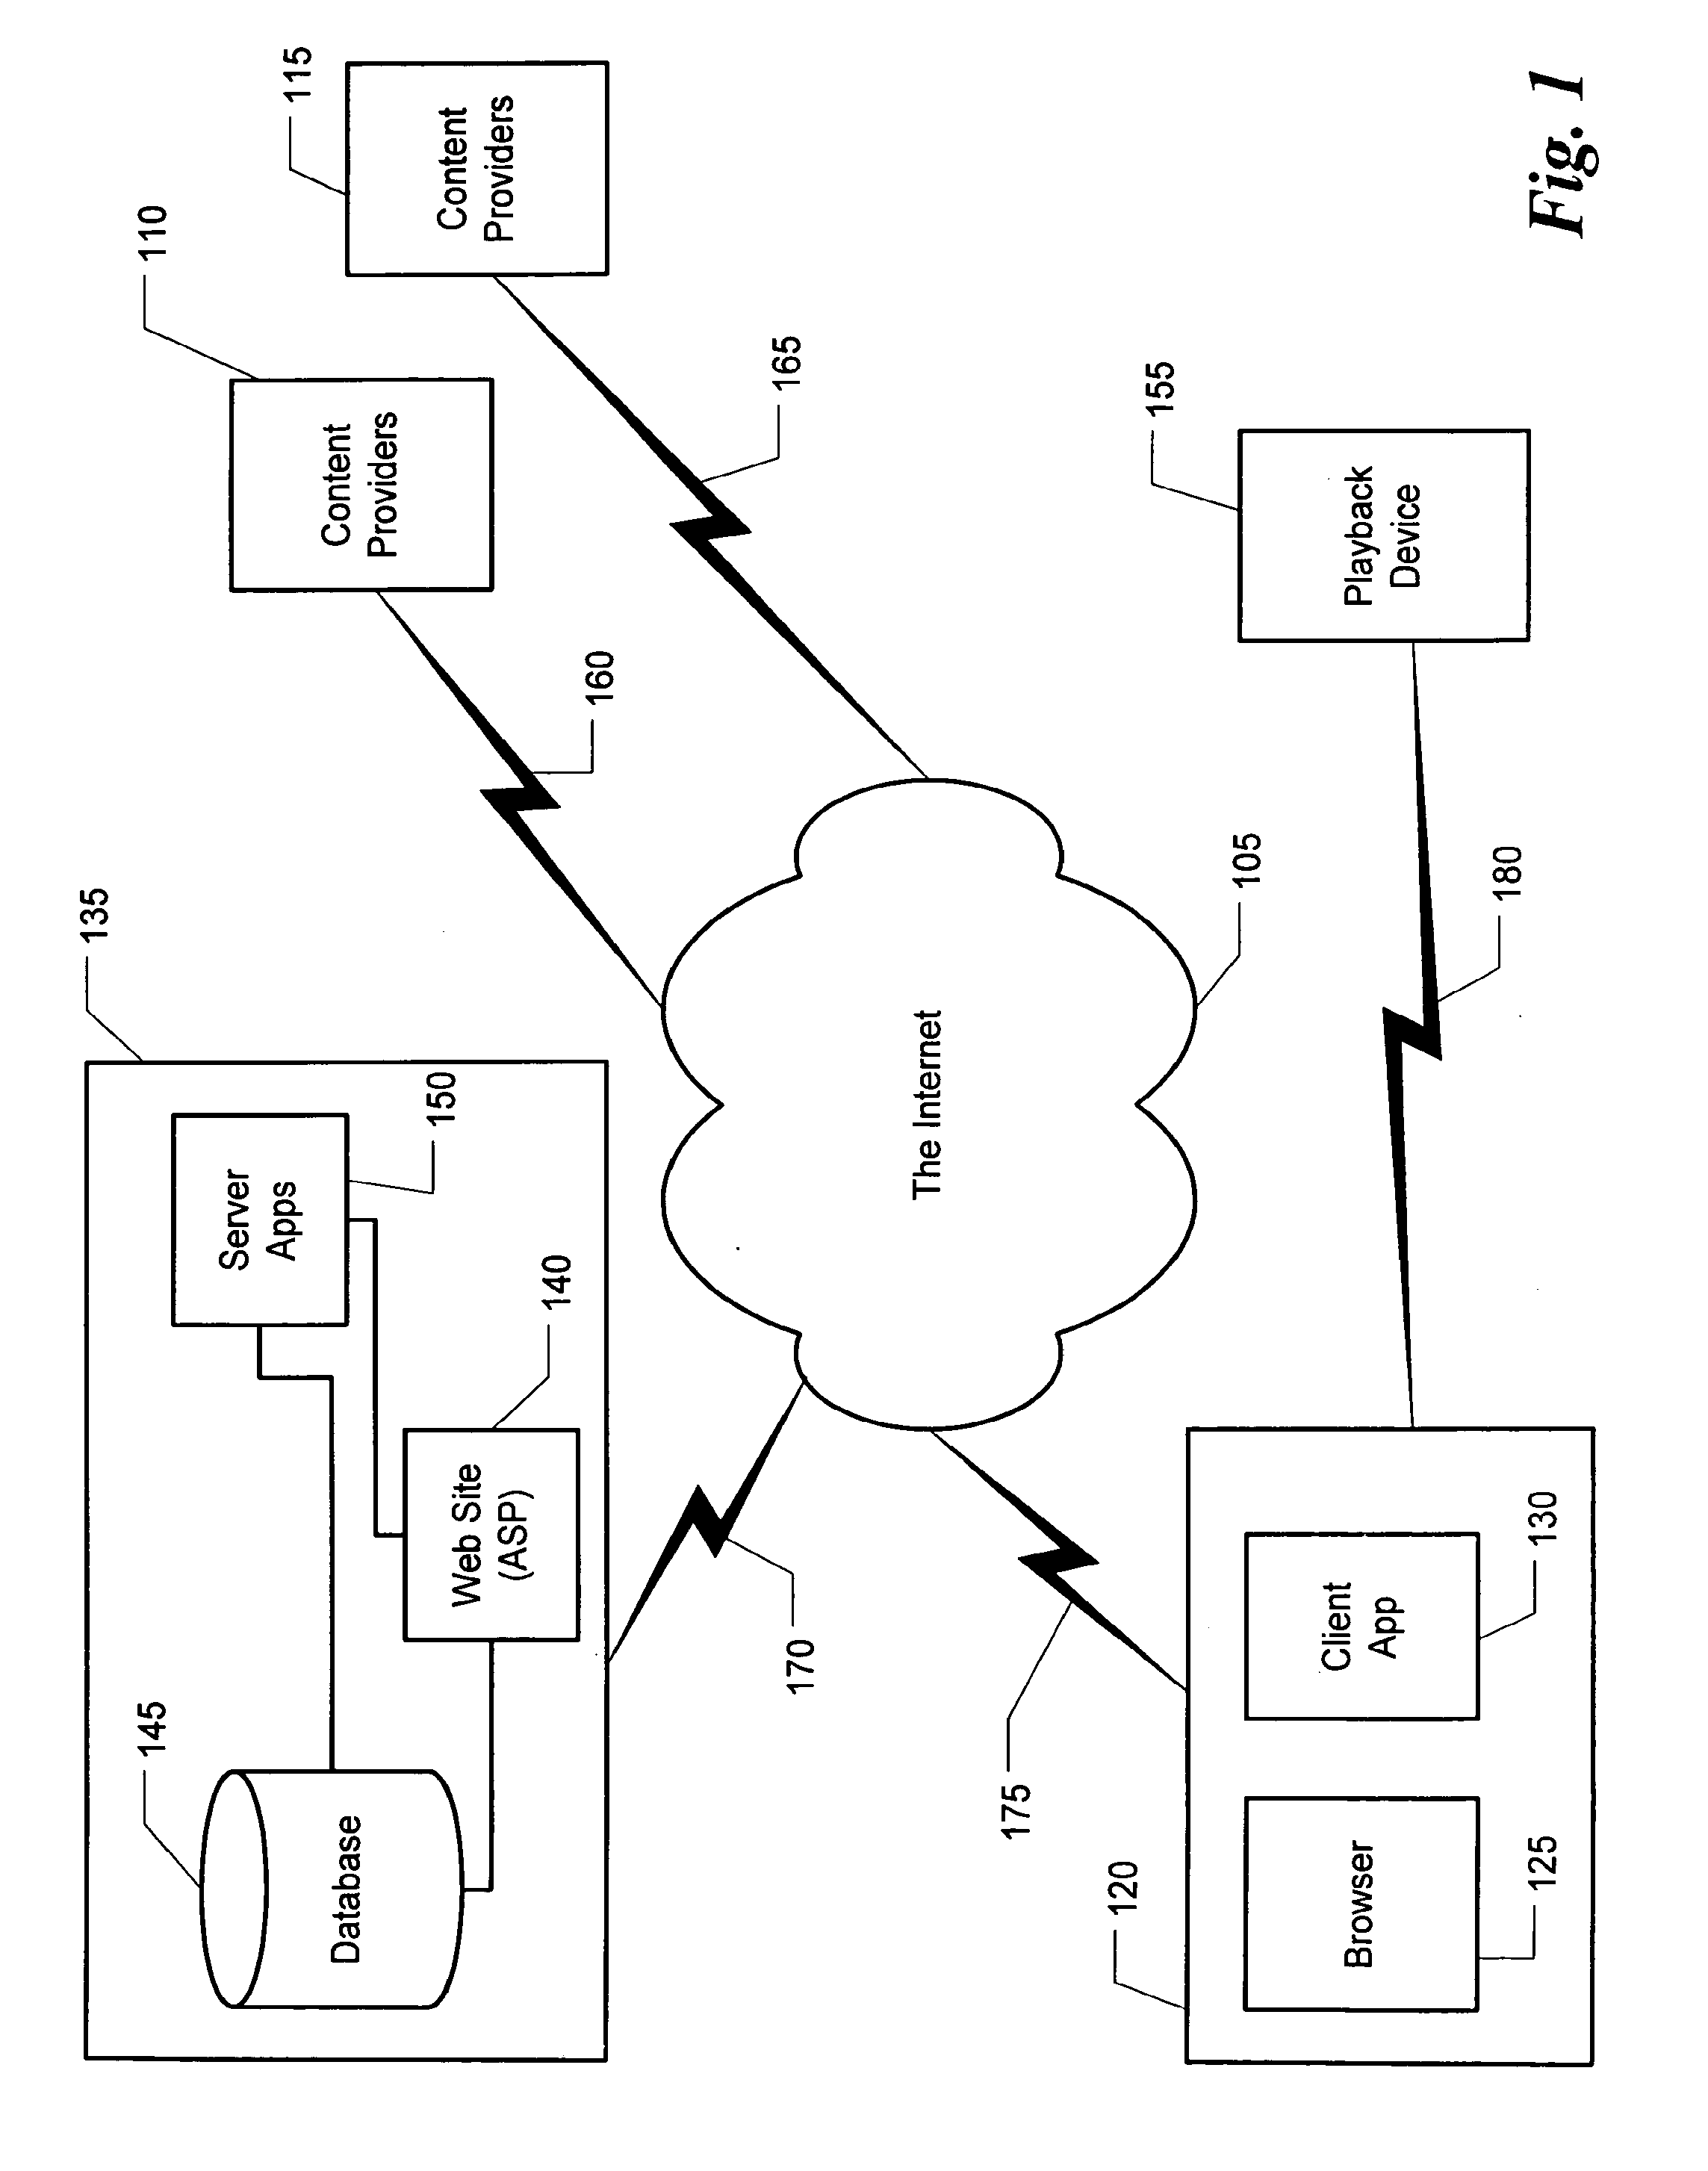 Media content device and system